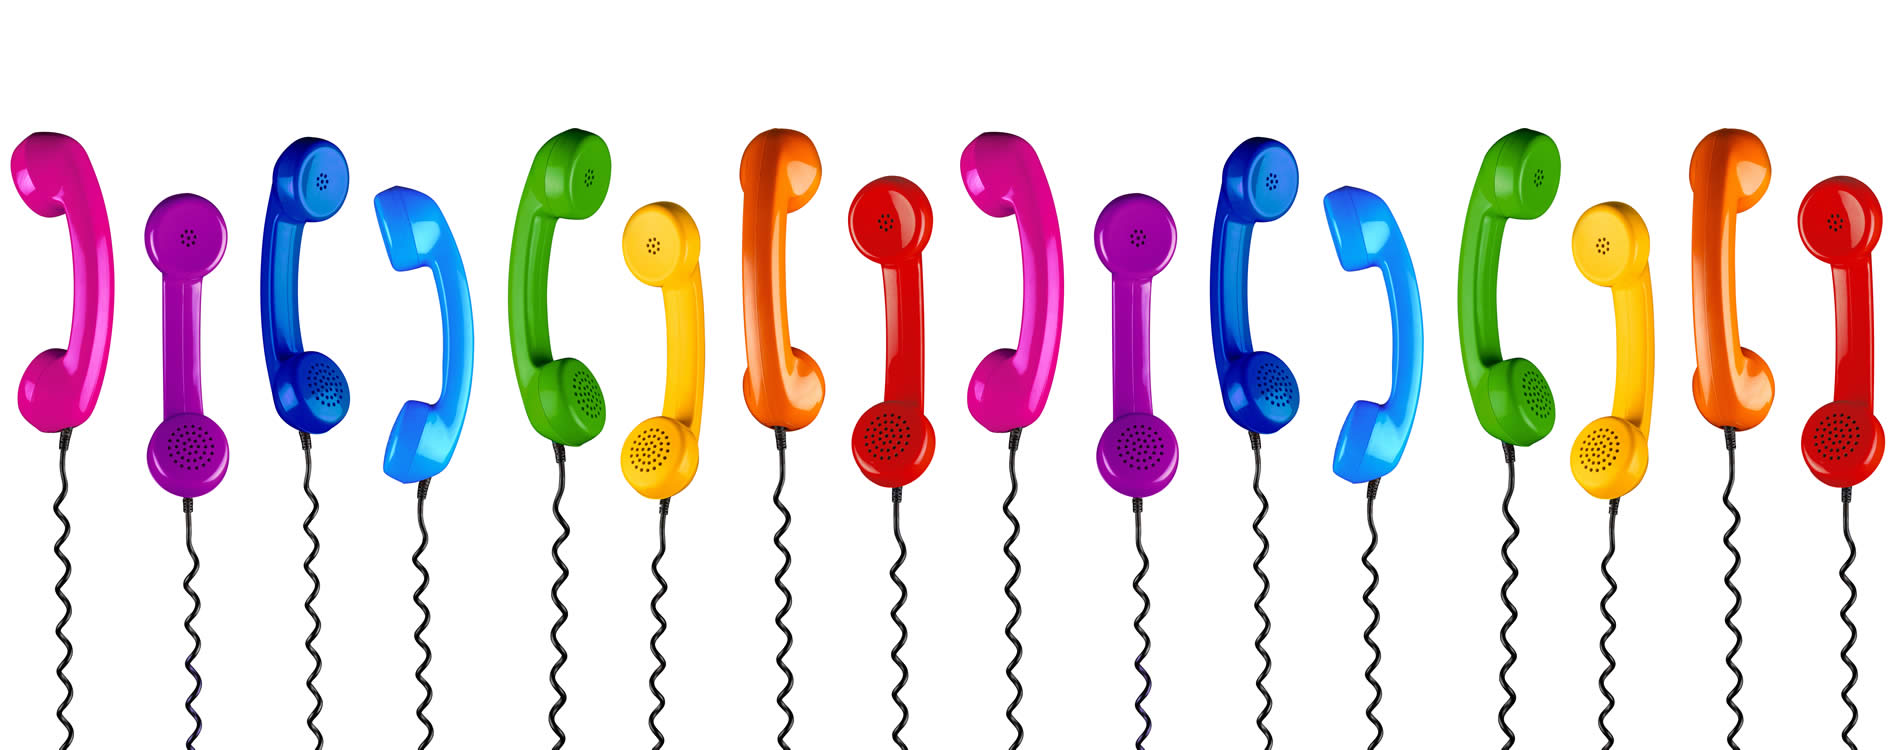 Colourful telephone handsets in a row